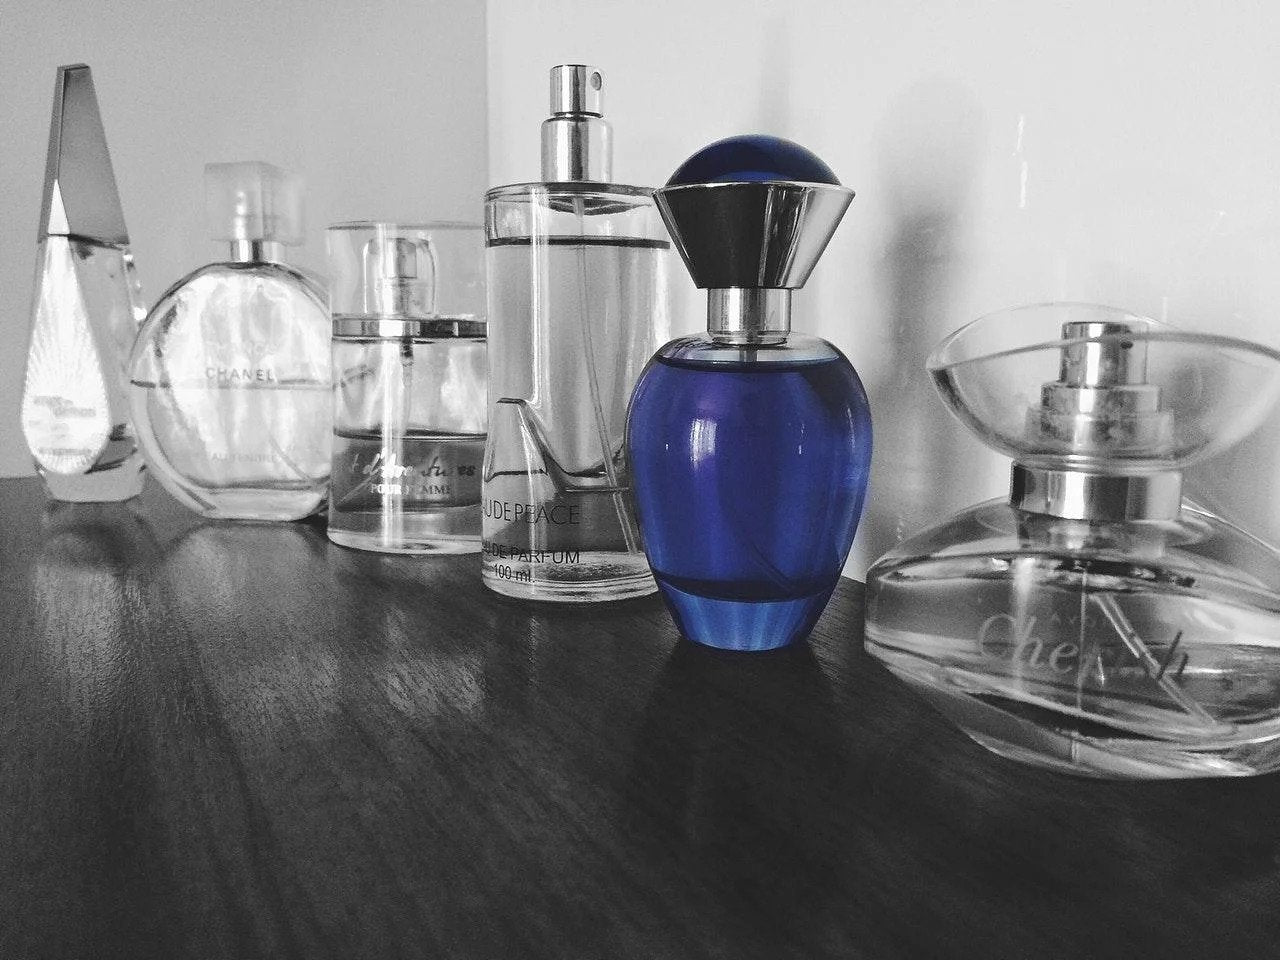 STORING PERFUMES- A COMPREHENSIVE GUIDE